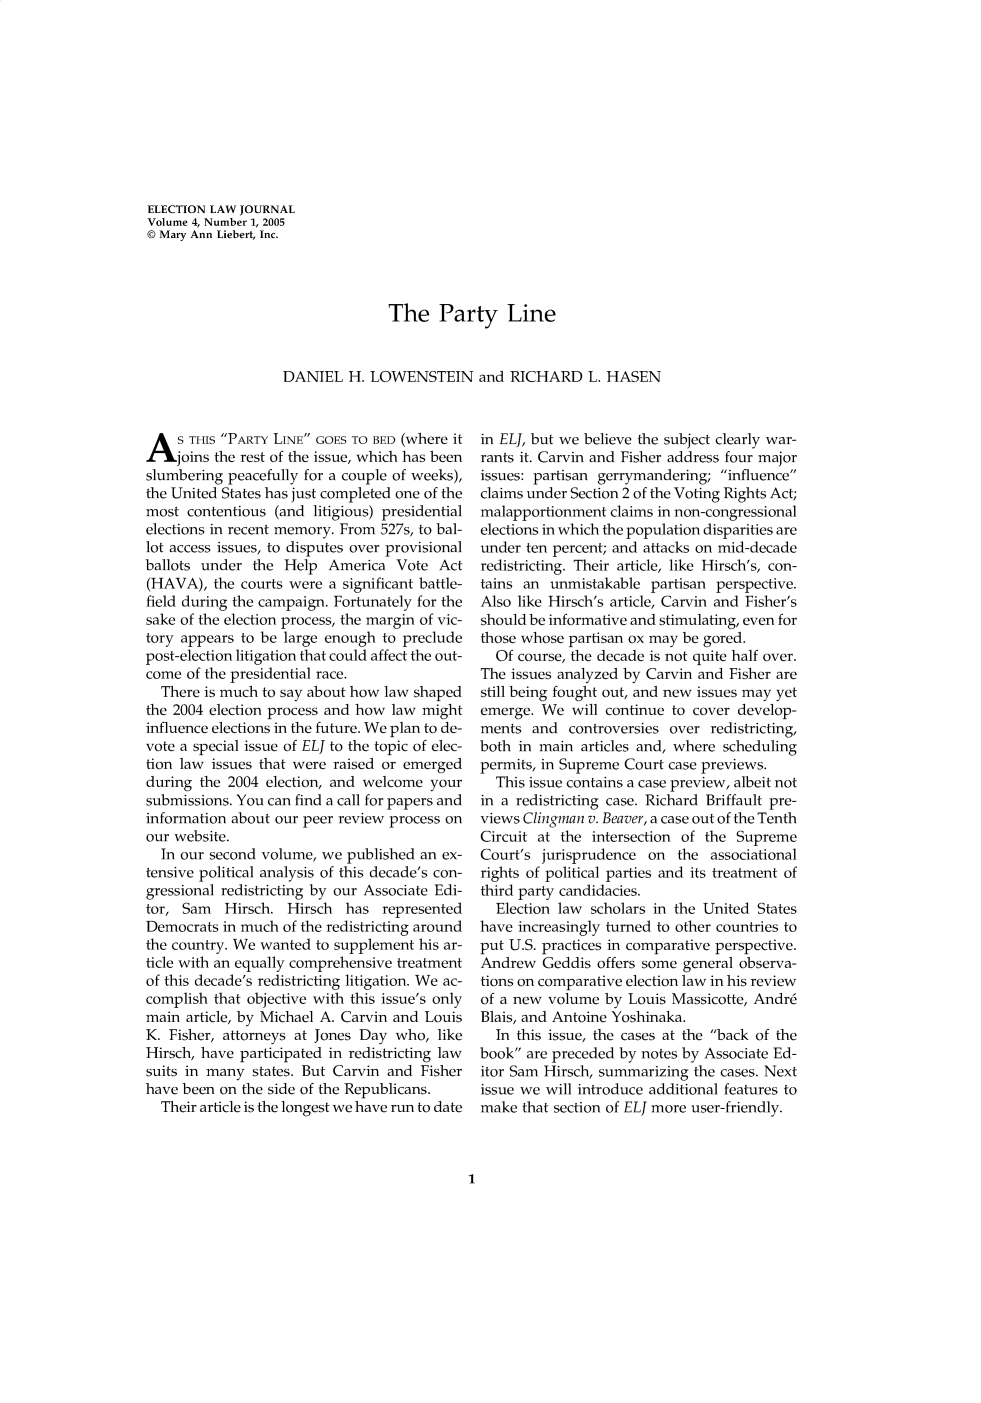 handle is hein.journals/enlwjr4 and id is 1 raw text is: ELECTION LAW JOURNAL
Volume 4, Number 1, 2005
© Mary Ann Liebert, Inc.
The Party Line
DANIEL H. LOWENSTEIN and RICHARD L. HASEN

A S THIS PARTY LINE GOES TO BED (where it
joins the rest of the issue, which has been
slumbering peacefully for a couple of weeks),
the United States has just completed one of the
most contentious (and litigious) presidential
elections in recent memory. From 527s, to bal-
lot access issues, to disputes over provisional
ballots under the Help America Vote Act
(HAVA), the courts were a significant battle-
field during the campaign. Fortunately for the
sake of the election process, the margin of vic-
tory appears to be large enough to preclude
post-election litigation that could affect the out-
come of the presidential race.
There is much to say about how law shaped
the 2004 election process and how law might
influence elections in the future. We plan to de-
vote a special issue of ELJ to the topic of elec-
tion law issues that were raised or emerged
during the 2004 election, and welcome your
submissions. You can find a call for papers and
information about our peer review process on
our website.
In our second volume, we published an ex-
tensive political analysis of this decade's con-
gressional redistricting by our Associate Edi-
tor, Sam Hirsch. Hirsch has represented
Democrats in much of the redistricting around
the country. We wanted to supplement his ar-
ticle with an equally comprehensive treatment
of this decade's redistricting litigation. We ac-
complish that objective with this issue's only
main article, by Michael A. Carvin and Louis
K. Fisher, attorneys at Jones Day who, like
Hirsch, have participated in redistricting law
suits in many states. But Carvin and Fisher
have been on the side of the Republicans.
Their article is the longest we have run to date

in ELJ, but we believe the subject clearly war-
rants it. Carvin and Fisher address four major
issues: partisan gerrymandering; influence
claims under Section 2 of the Voting Rights Act;
malapportionment claims in non-congressional
elections in which the population disparities are
under ten percent; and attacks on mid-decade
redistricting. Their article, like Hirsch's, con-
tains an unmistakable partisan perspective.
Also like Hirsch's article, Carvin and Fisher's
should be informative and stimulating, even for
those whose partisan ox may be gored.
Of course, the decade is not quite half over.
The issues analyzed by Carvin and Fisher are
still being fought out, and new issues may yet
emerge. We will continue to cover develop-
ments and controversies over redistricting,
both in main articles and, where scheduling
permits, in Supreme Court case previews.
This issue contains a case preview, albeit not
in a redistricting case. Richard Briffault pre-
views Clingman v. Beaver, a case out of the Tenth
Circuit at the intersection of the Supreme
Court's jurisprudence on the associational
rights of political parties and its treatment of
third party candidacies.
Election law scholars in the United States
have increasingly turned to other countries to
put U.S. practices in comparative perspective.
Andrew Geddis offers some general observa-
tions on comparative election law in his review
of a new volume by Louis Massicotte, Andr6
Blais, and Antoine Yoshinaka.
In this issue, the cases at the back of the
book are preceded by notes by Associate Ed-
itor Sam Hirsch, summarizing the cases. Next
issue we will introduce additional features to
make that section of ELJ more user-friendly.

1


